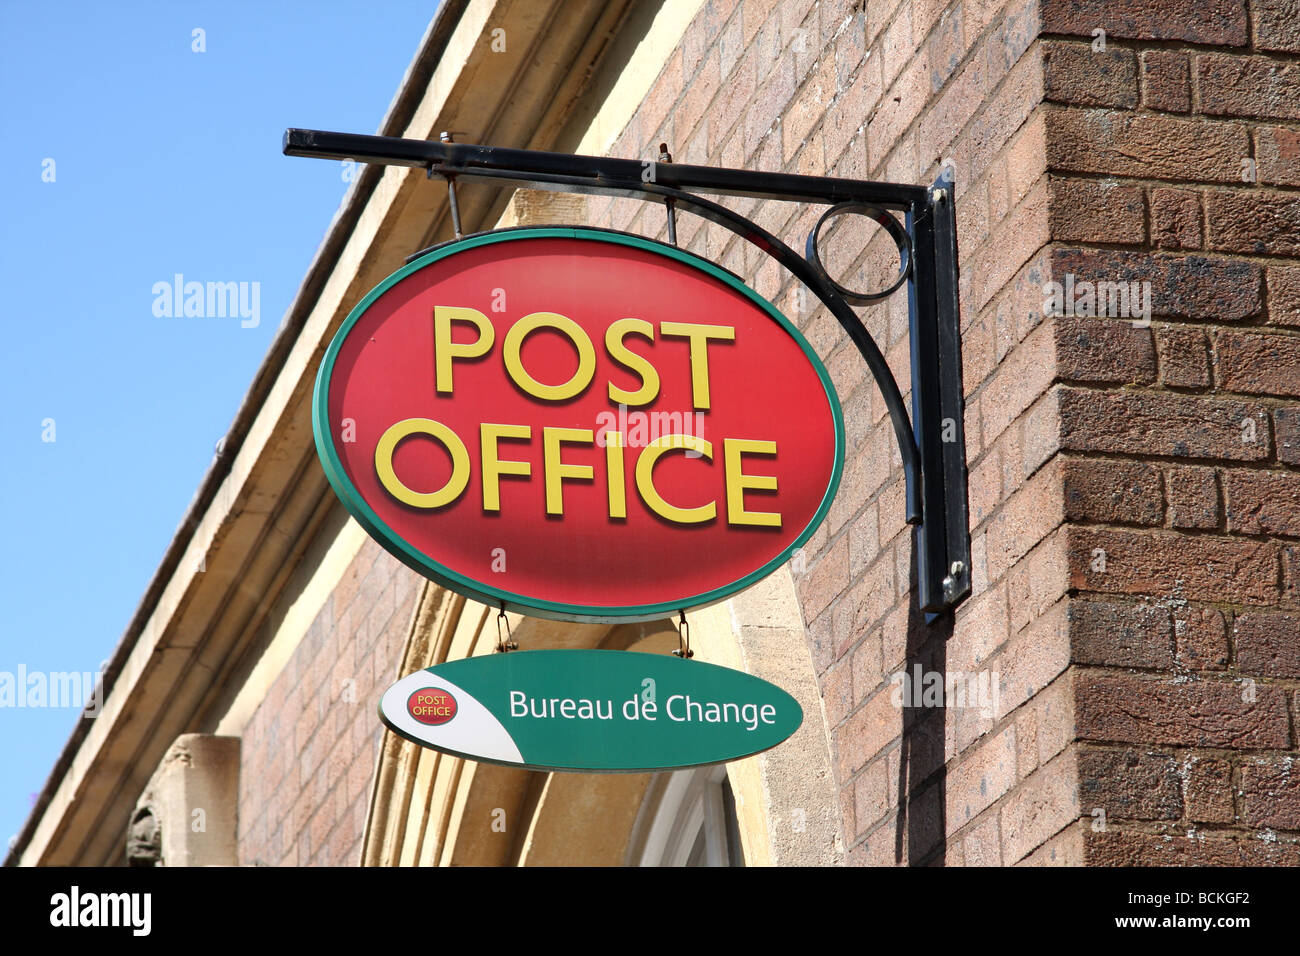 Post Office sign, Malvern, Worcestershire Stock Photo